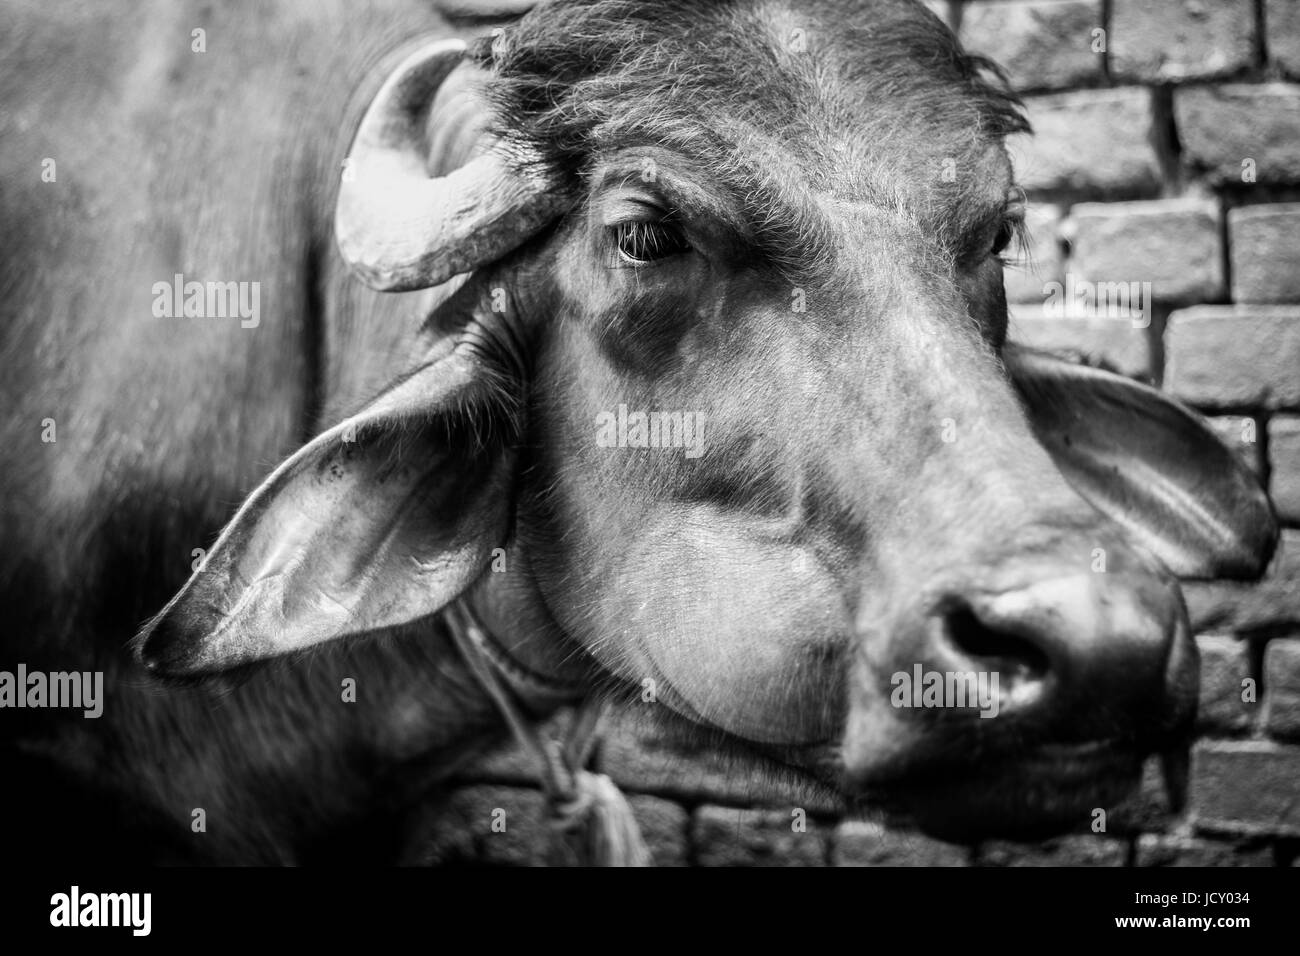 Animal headshot and portrait image of Asian Water Buffalo. A stunning black and white close-up of a buffalo head. A powerful beast of burden in Asia Stock Photo